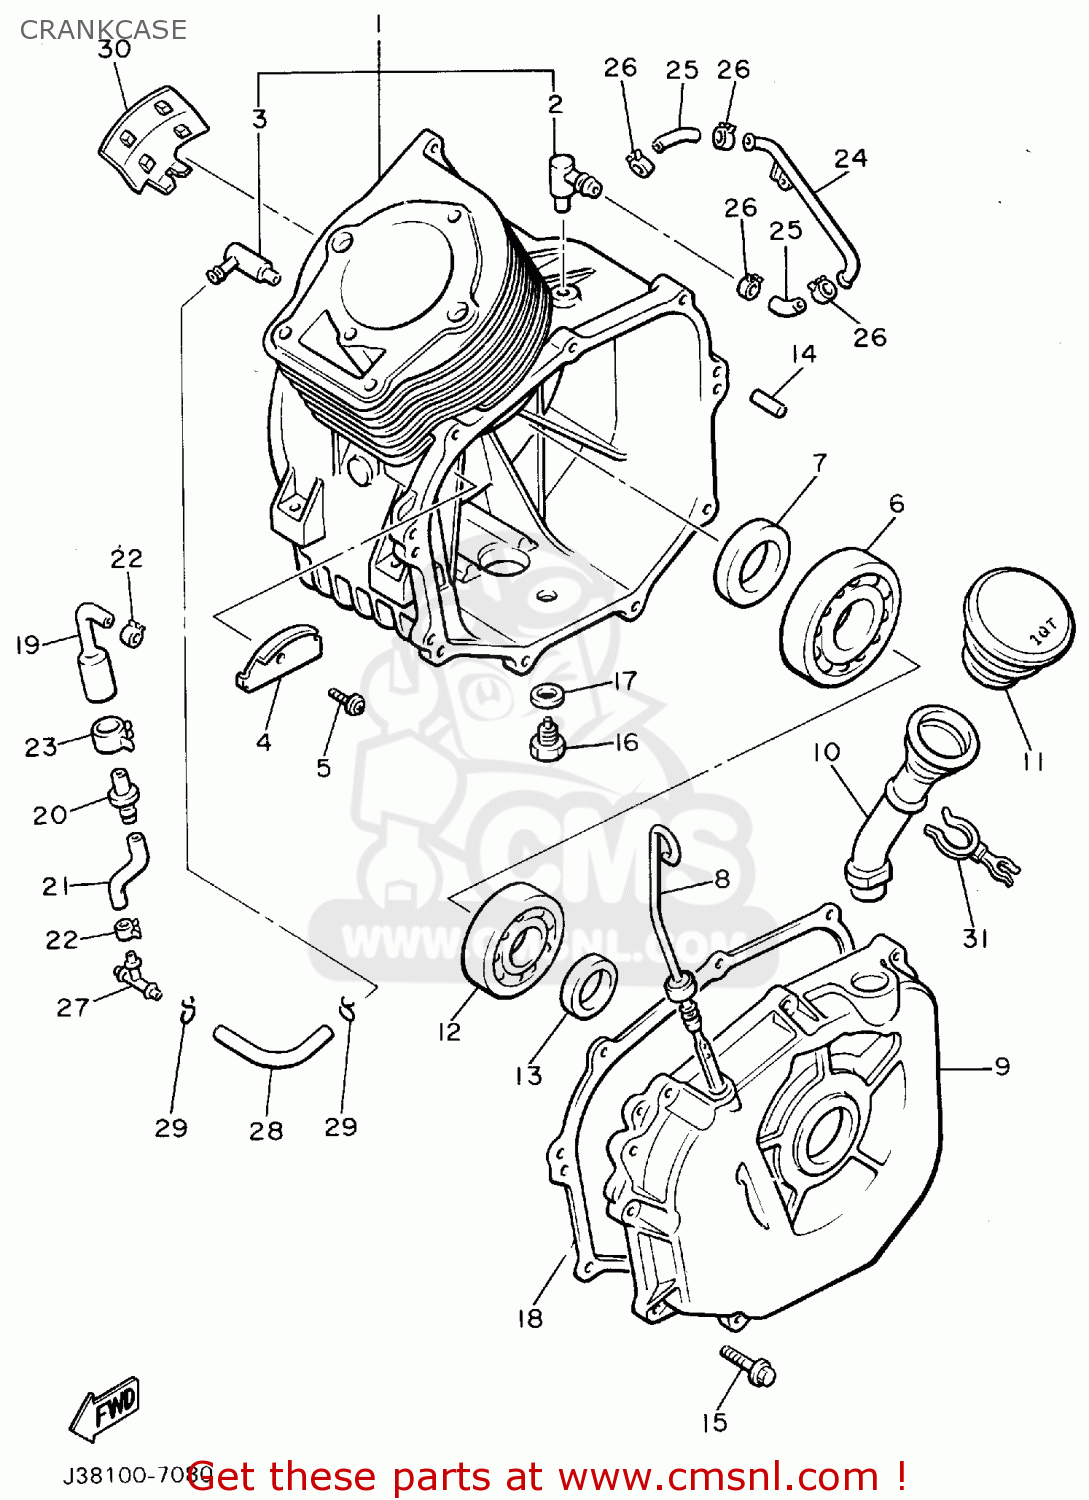 Yamaha G16a Engine Diagram Wiring Diagram Page Grow Owner Grow Owner Faishoppingconsvitol It